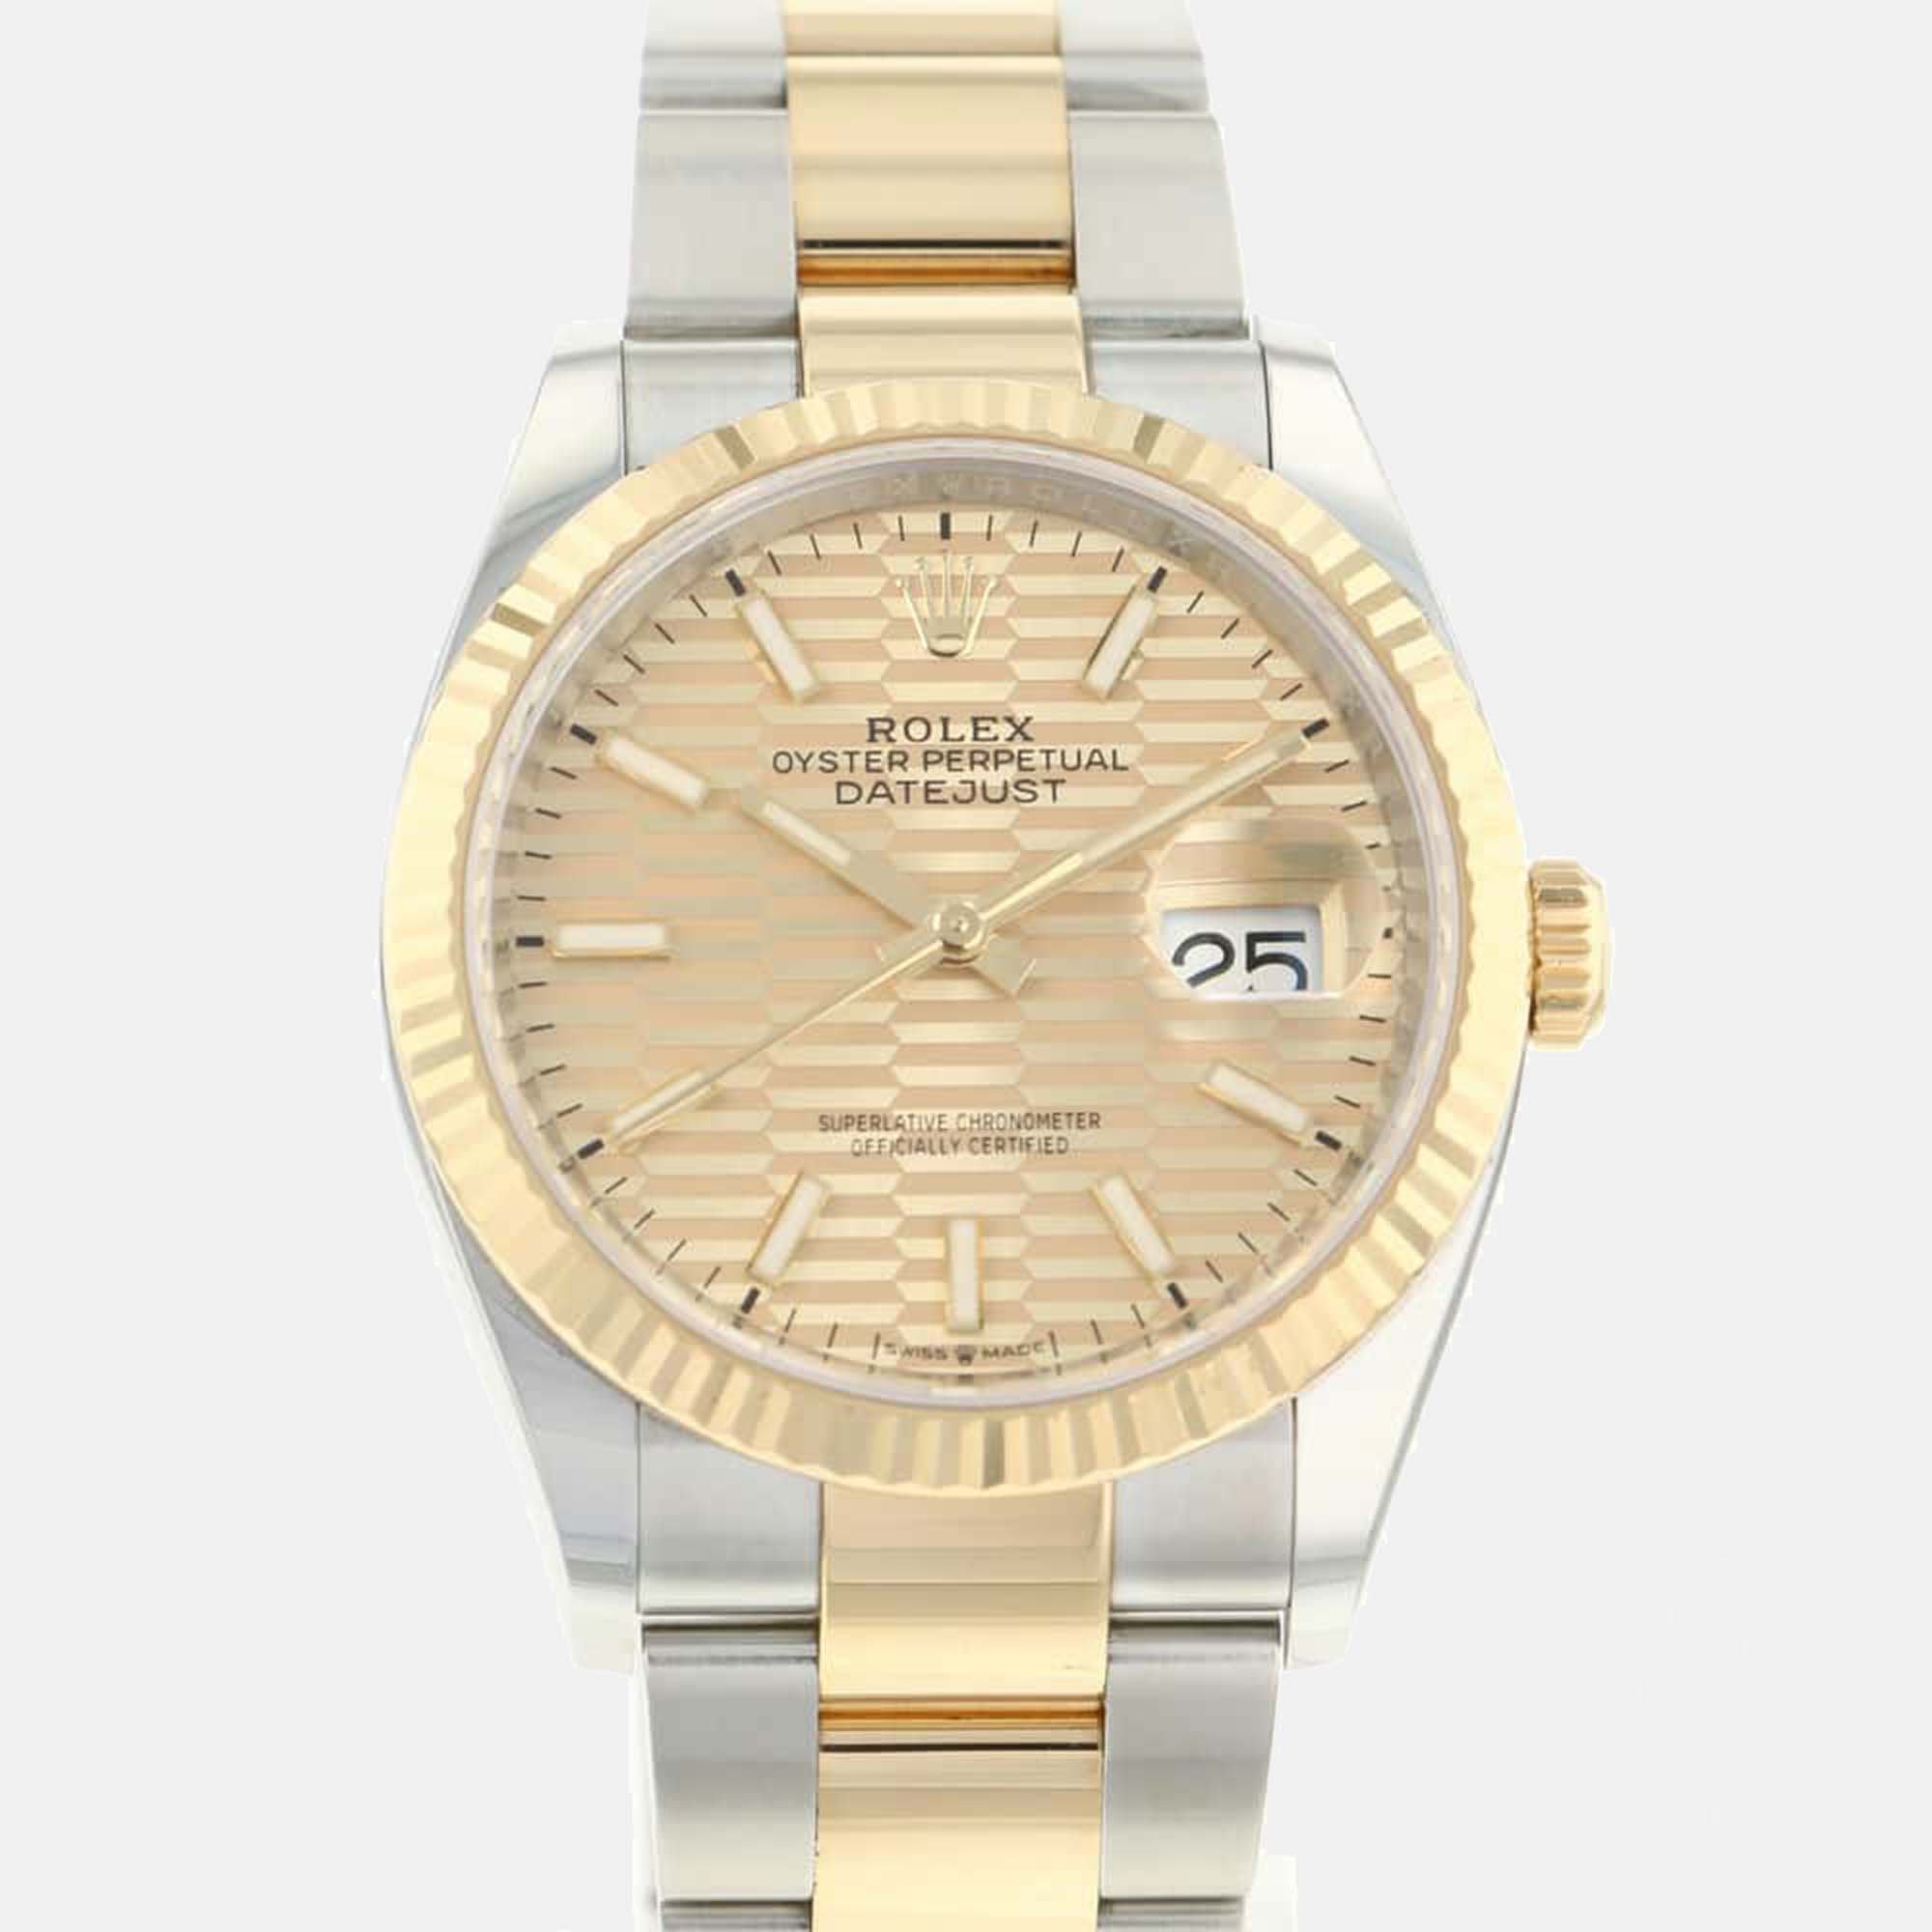 

Rolex Gold Fluted 18k Yellow Gold And Stainless Steel Datejust 126233 Automatic Men's Wristwatch 36 mm